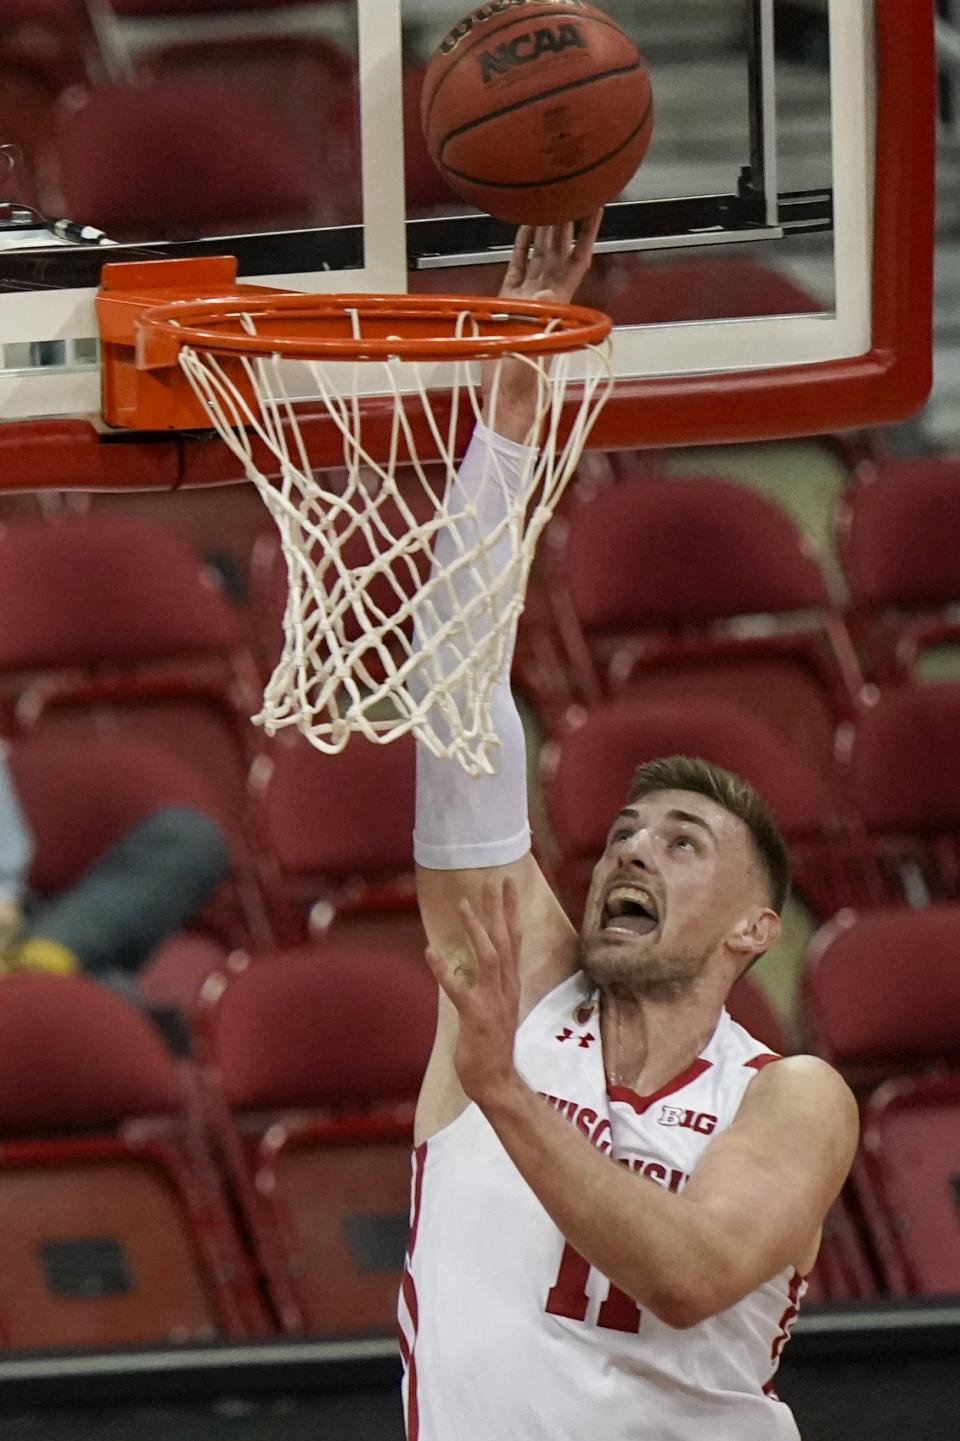 Wisconsin's Micah Potter shoots during the first half of an NCAA college basketball game against Wisconsin-Green Bay Tuesday, Dec. 1, 2020, in Madison, Wis. (AP Photo/Morry Gash)